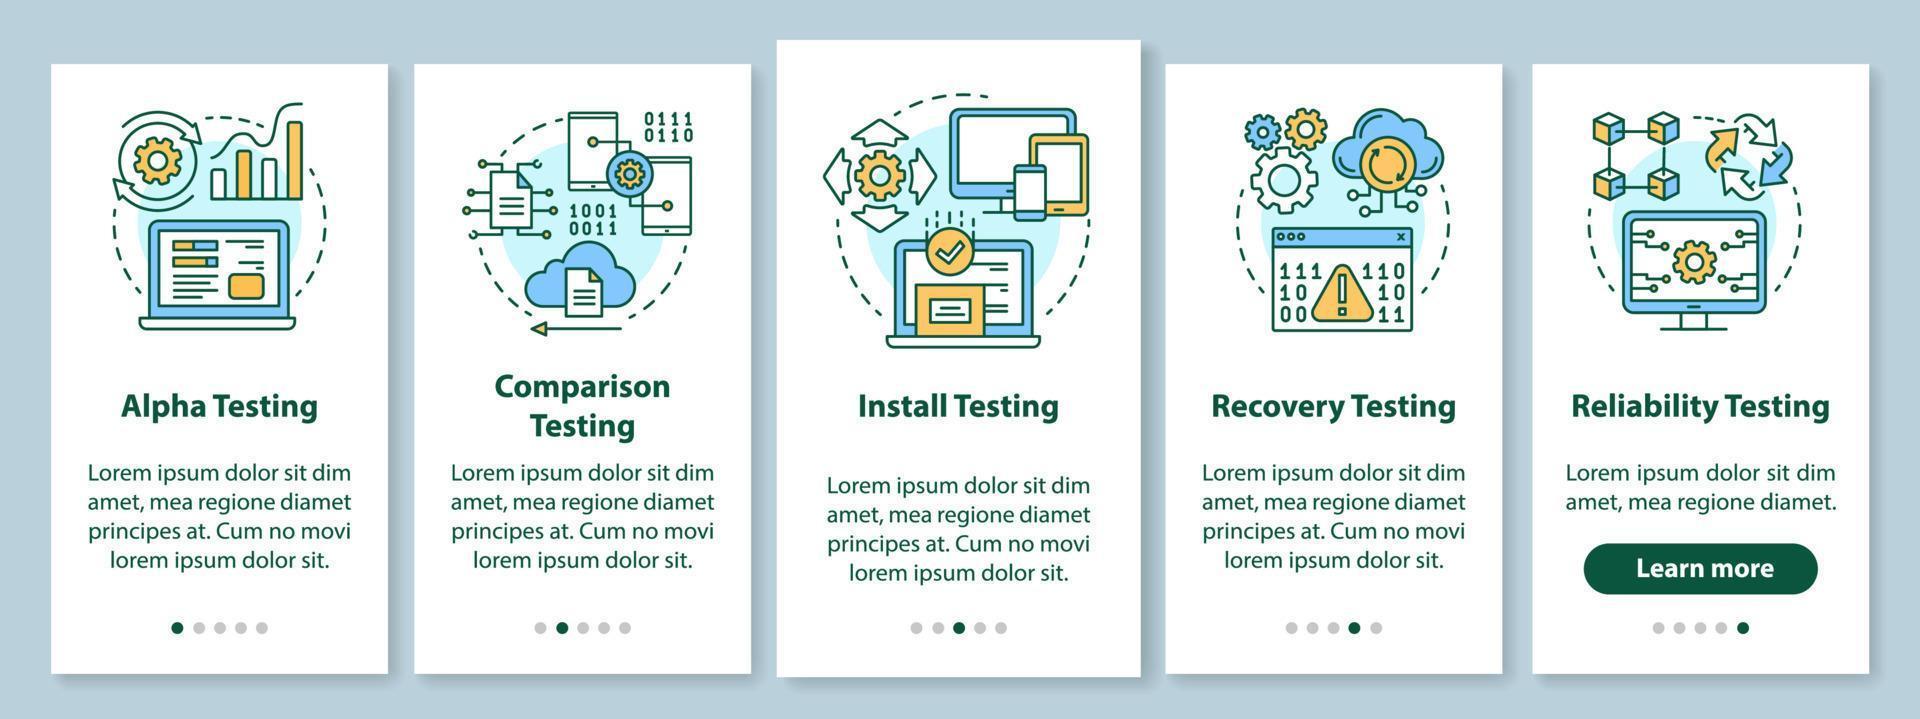 Software performance testing onboarding mobile app page screen with linear concepts. Program quality control walkthrough steps graphic instructions. UX, UI, GUI vector template with illustrations